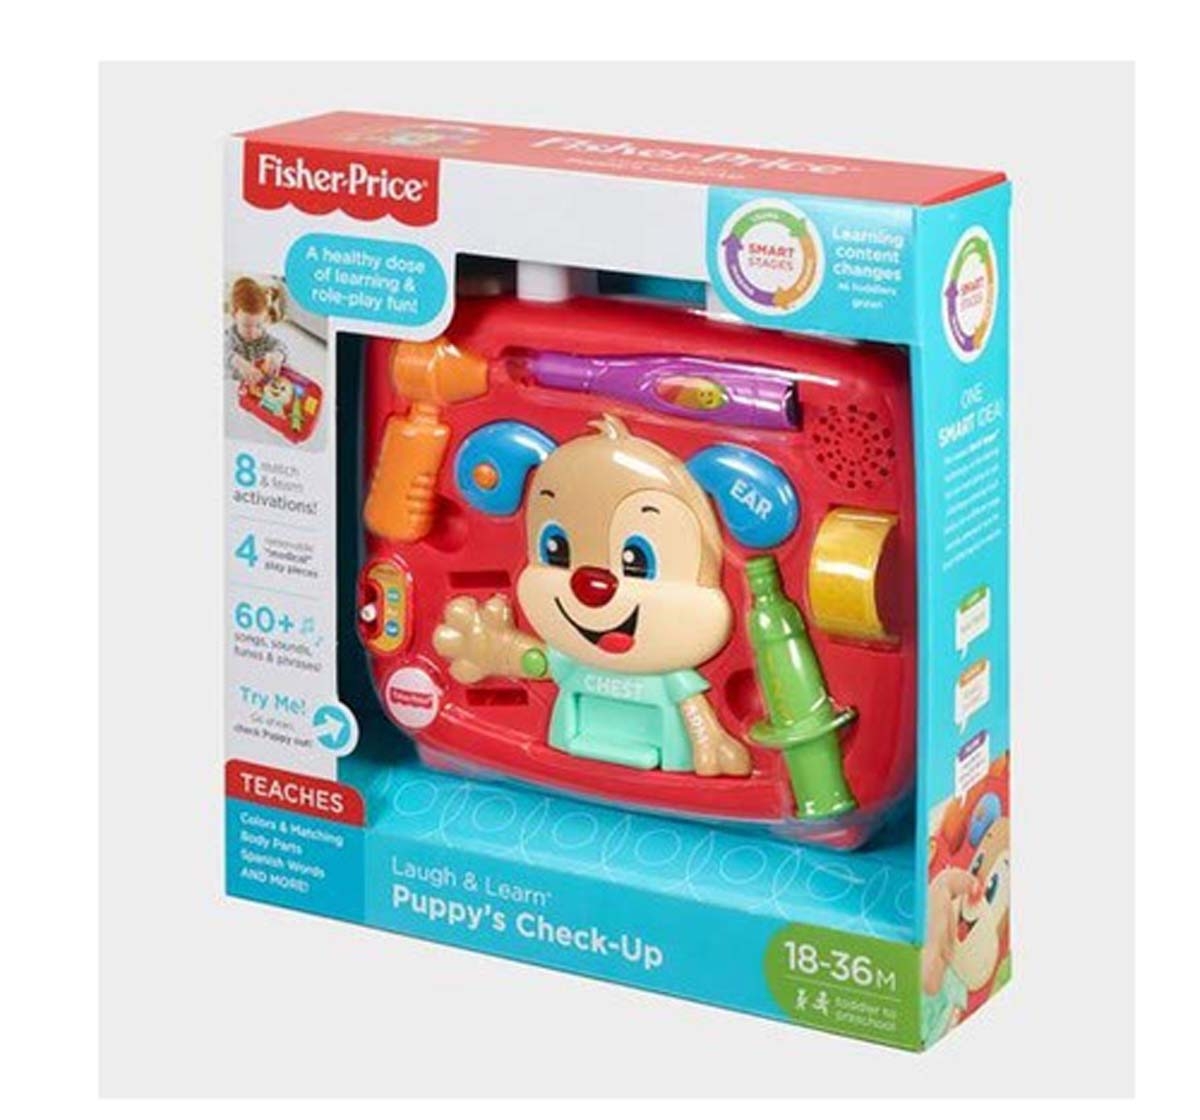 Fisher-Price | Fisher Price Laugh And Learn Puppy'S Check-Up Kit Learning Toys for Kids age 18M + 